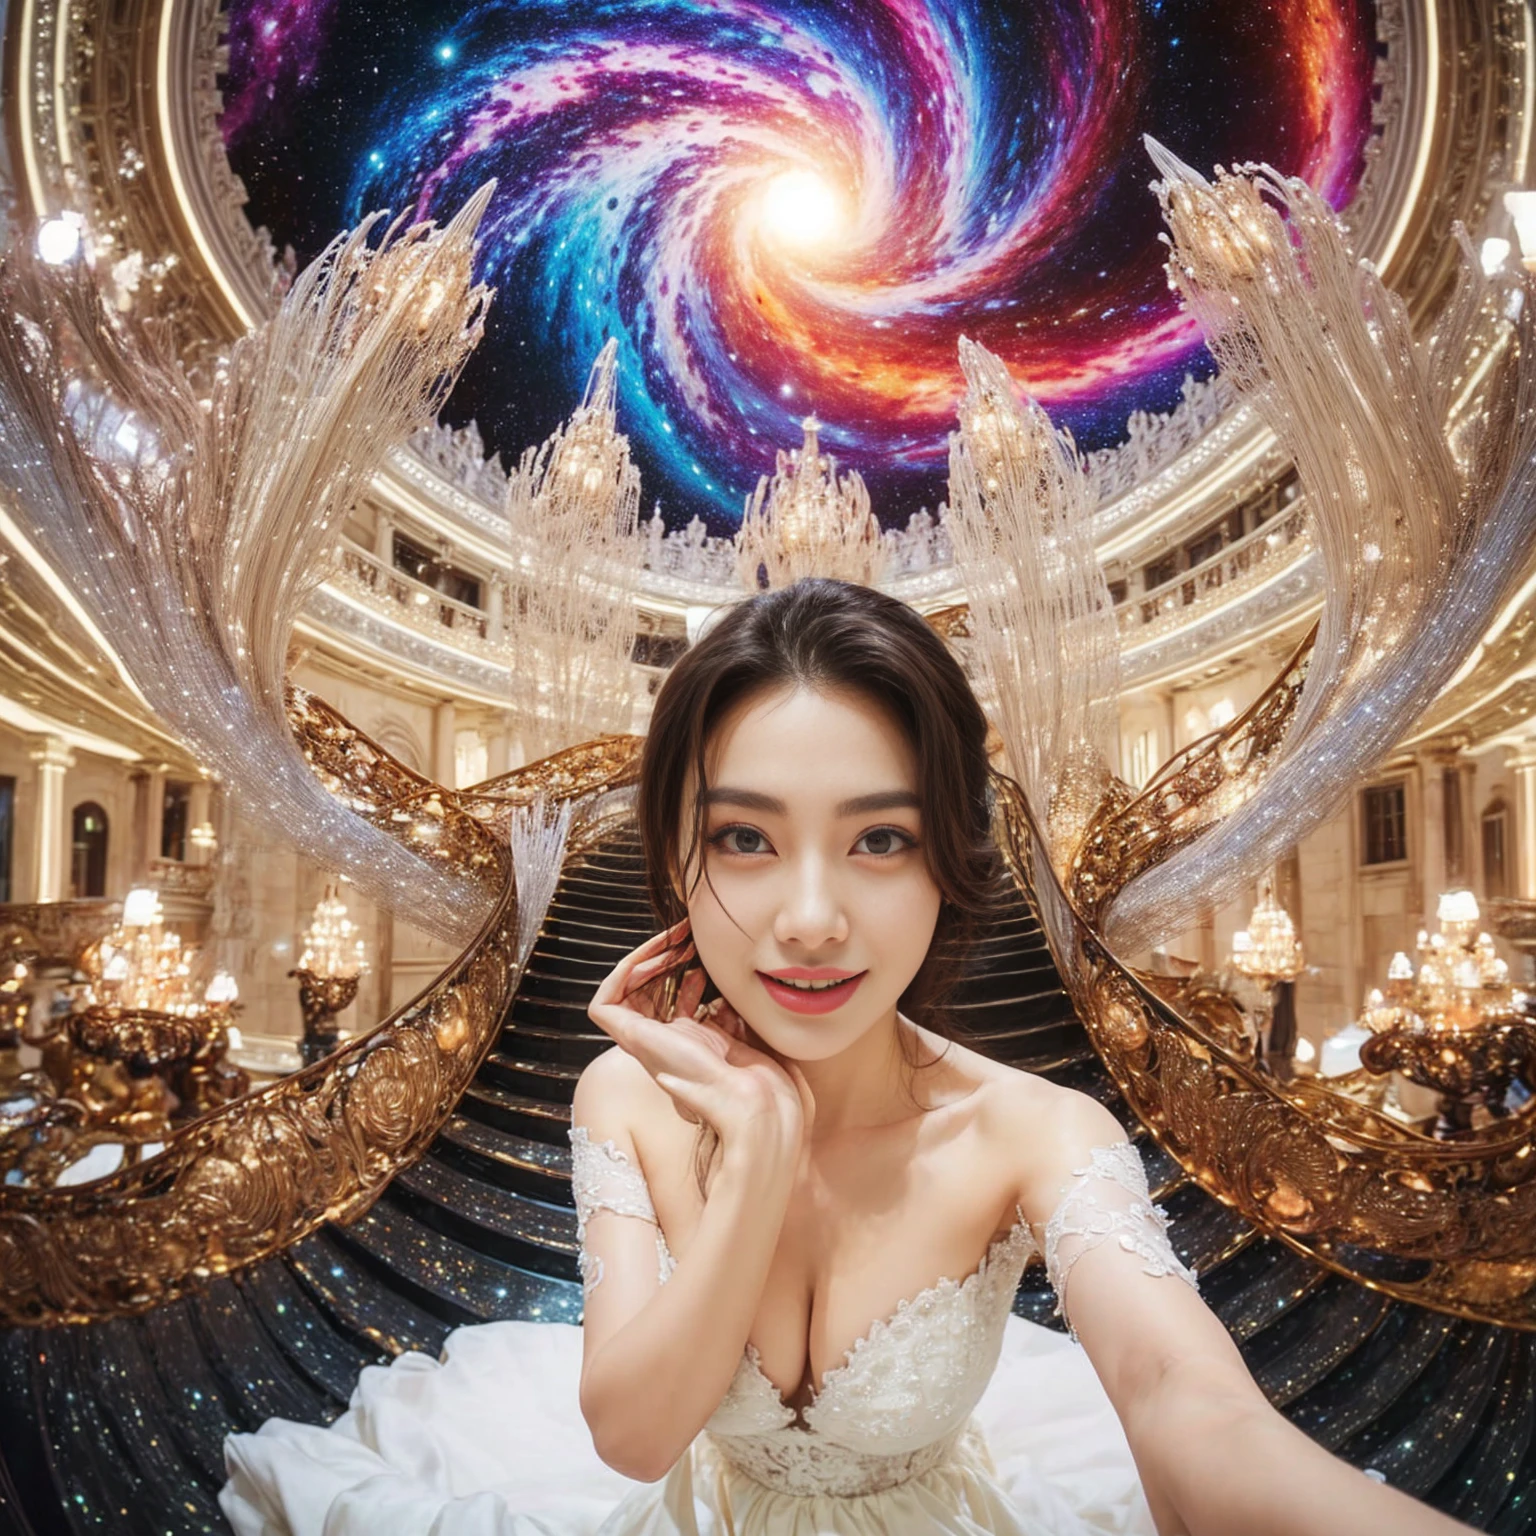 arafed image of a woman in a wedding dress posing for a picture, inside her surreal vr castle, goddess of galaxies, 8k selfie photograph, strange portrait with galaxy, wide angle fantasy art, wide angle dynamic portrait, fantasy beautiful, galaxy, sha xi, spiral heavens, album art, palace floating in heaven, grand!, 4k highly detailed digital art